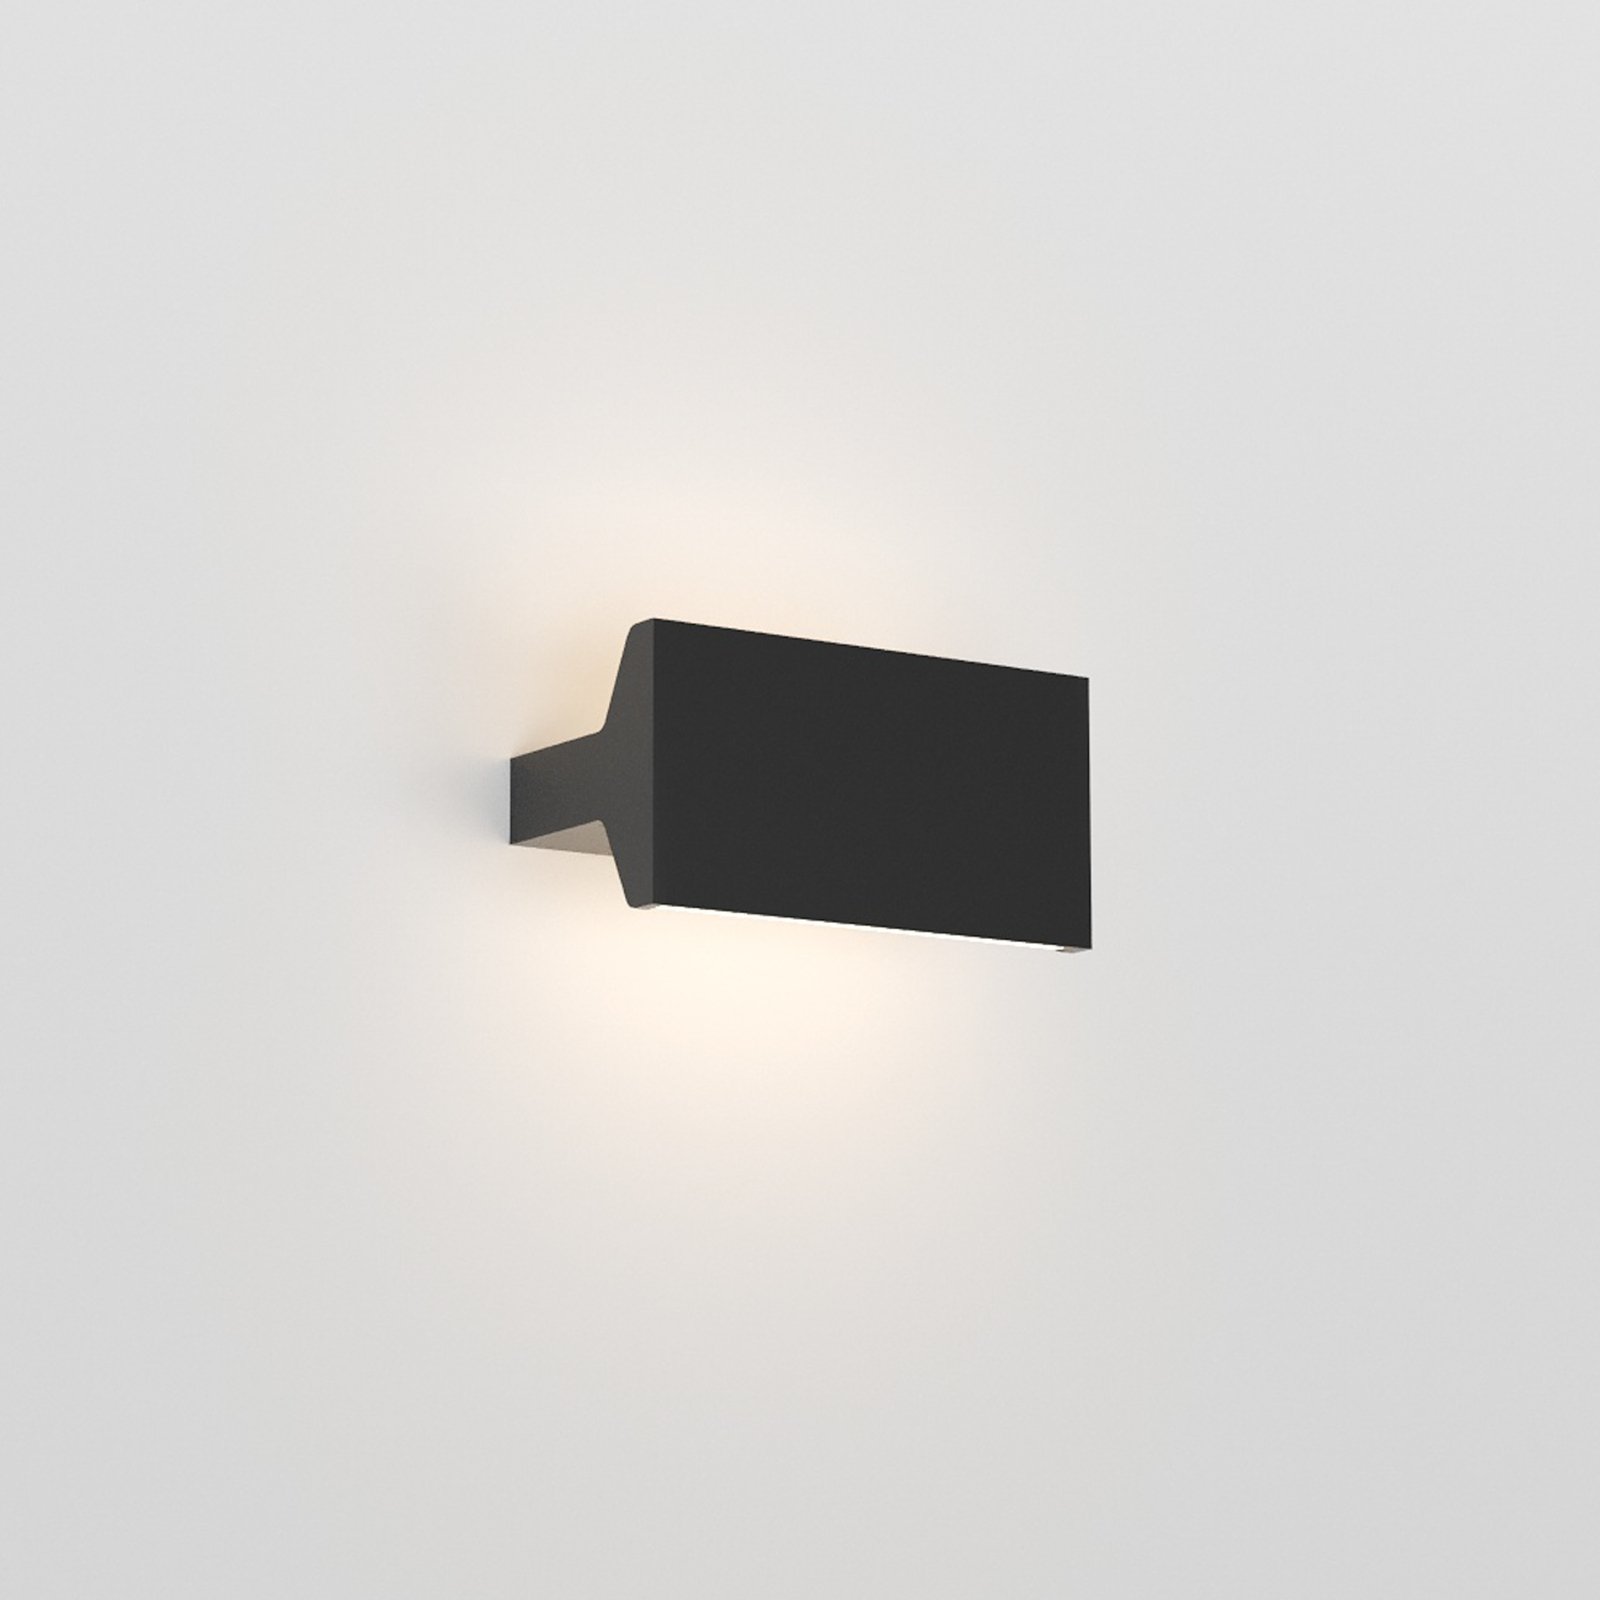 Rotaliana Ipe W1 dimmable phase 2 700 K noire